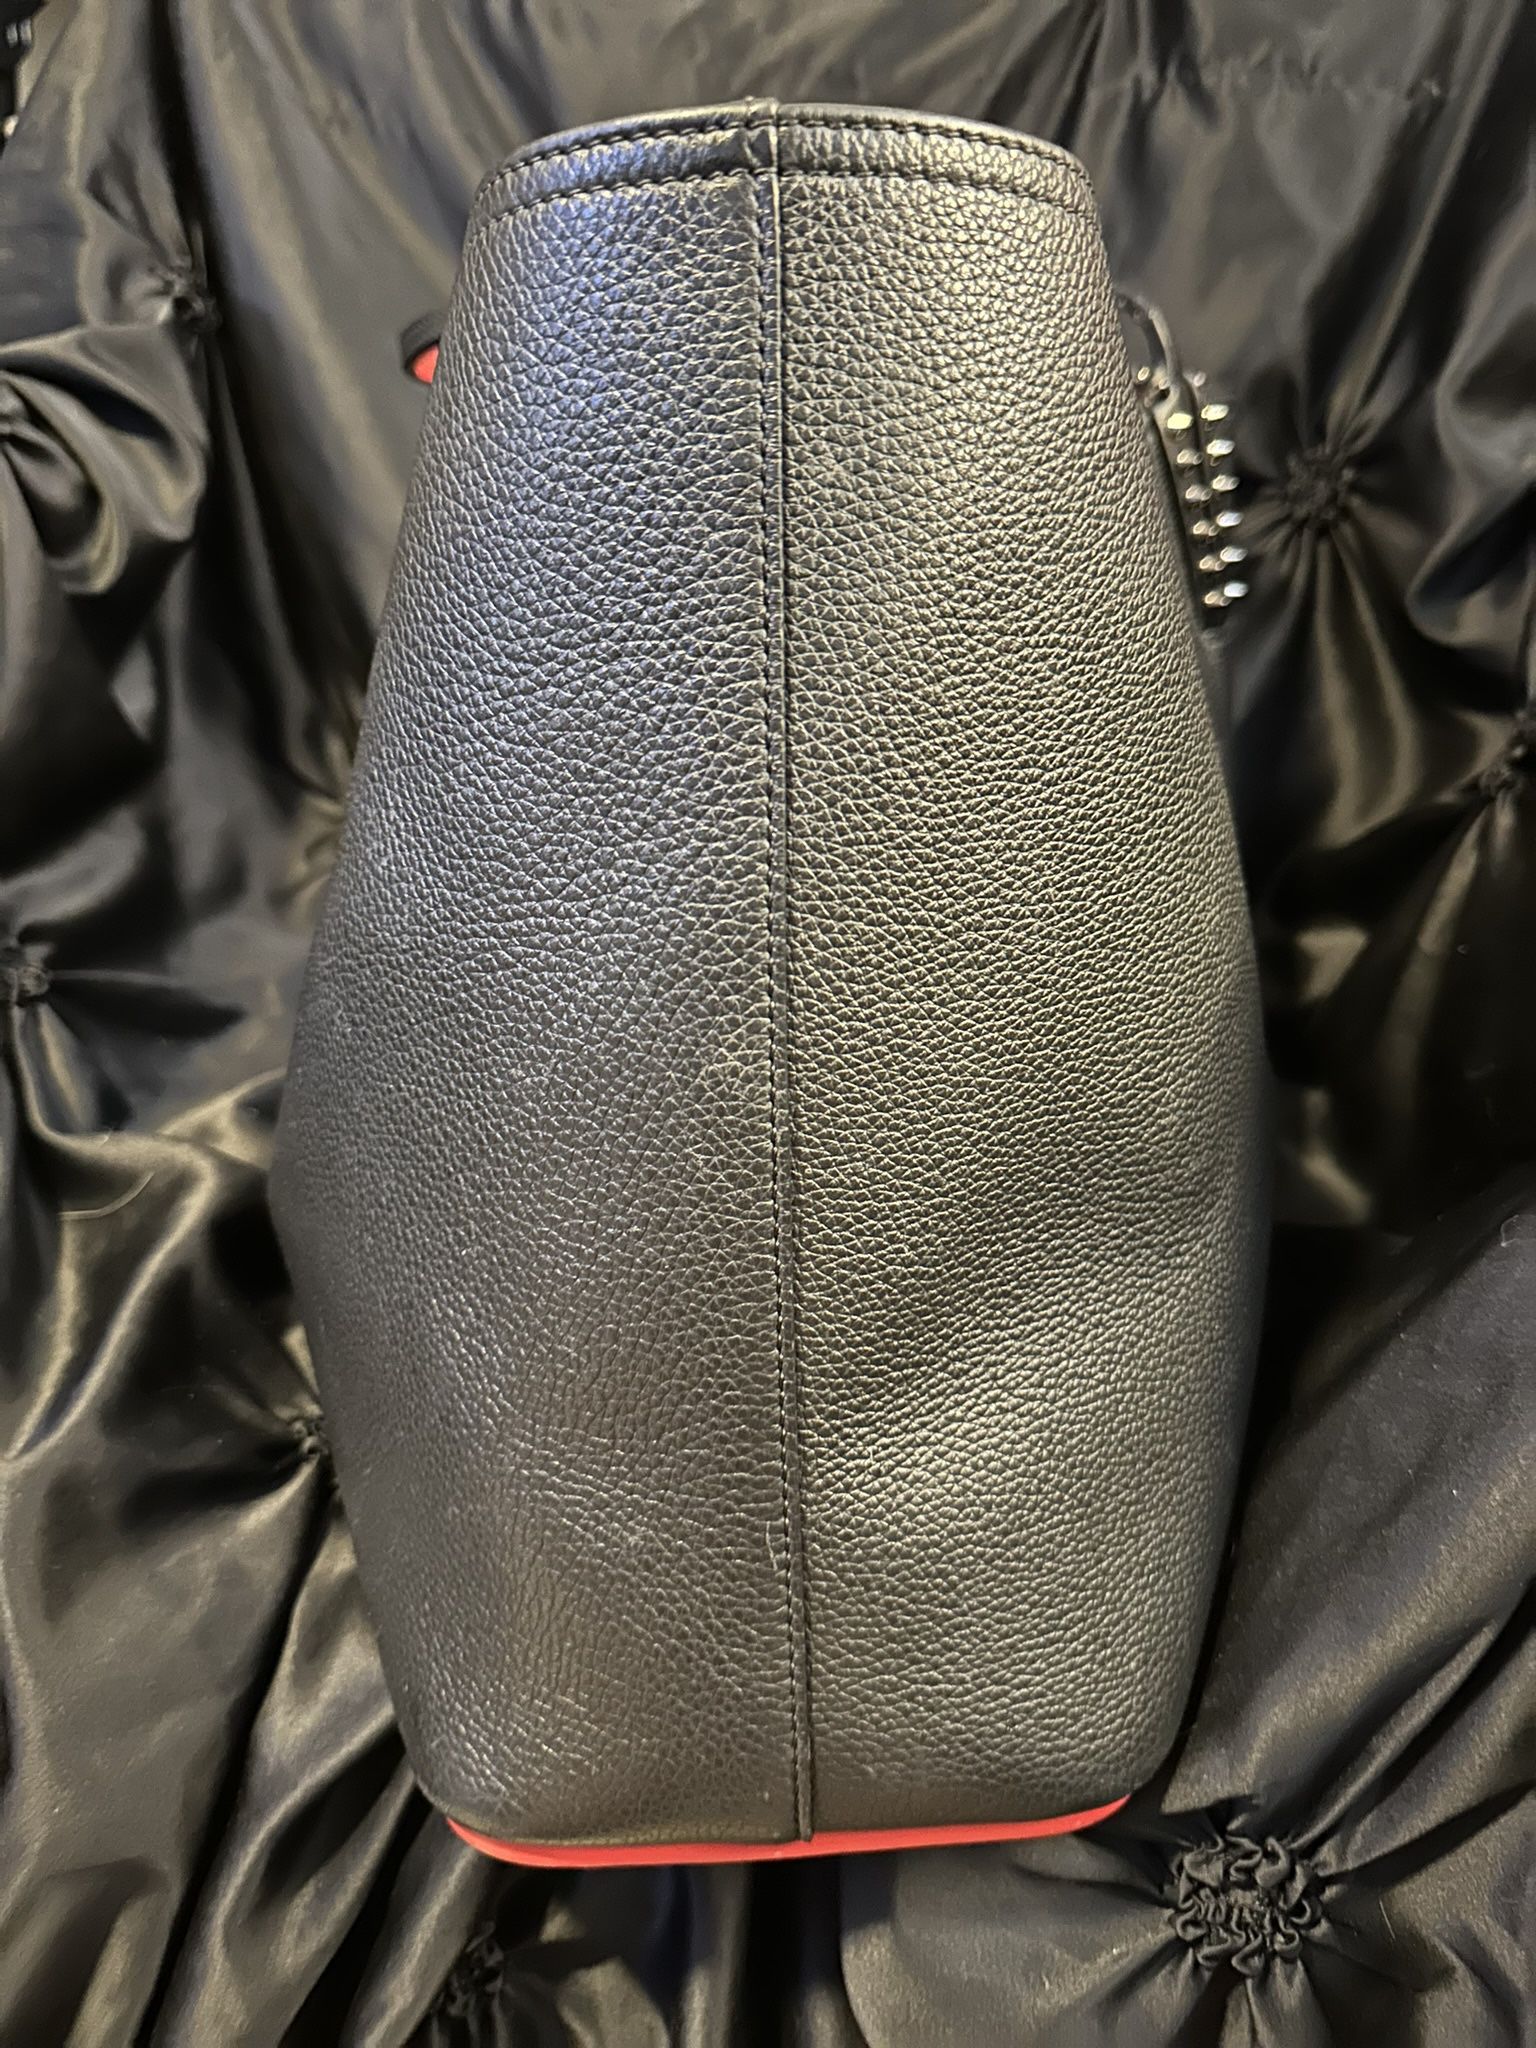 Christian Louboutin Cabata Leather Tote for Sale in Downey, CA - OfferUp